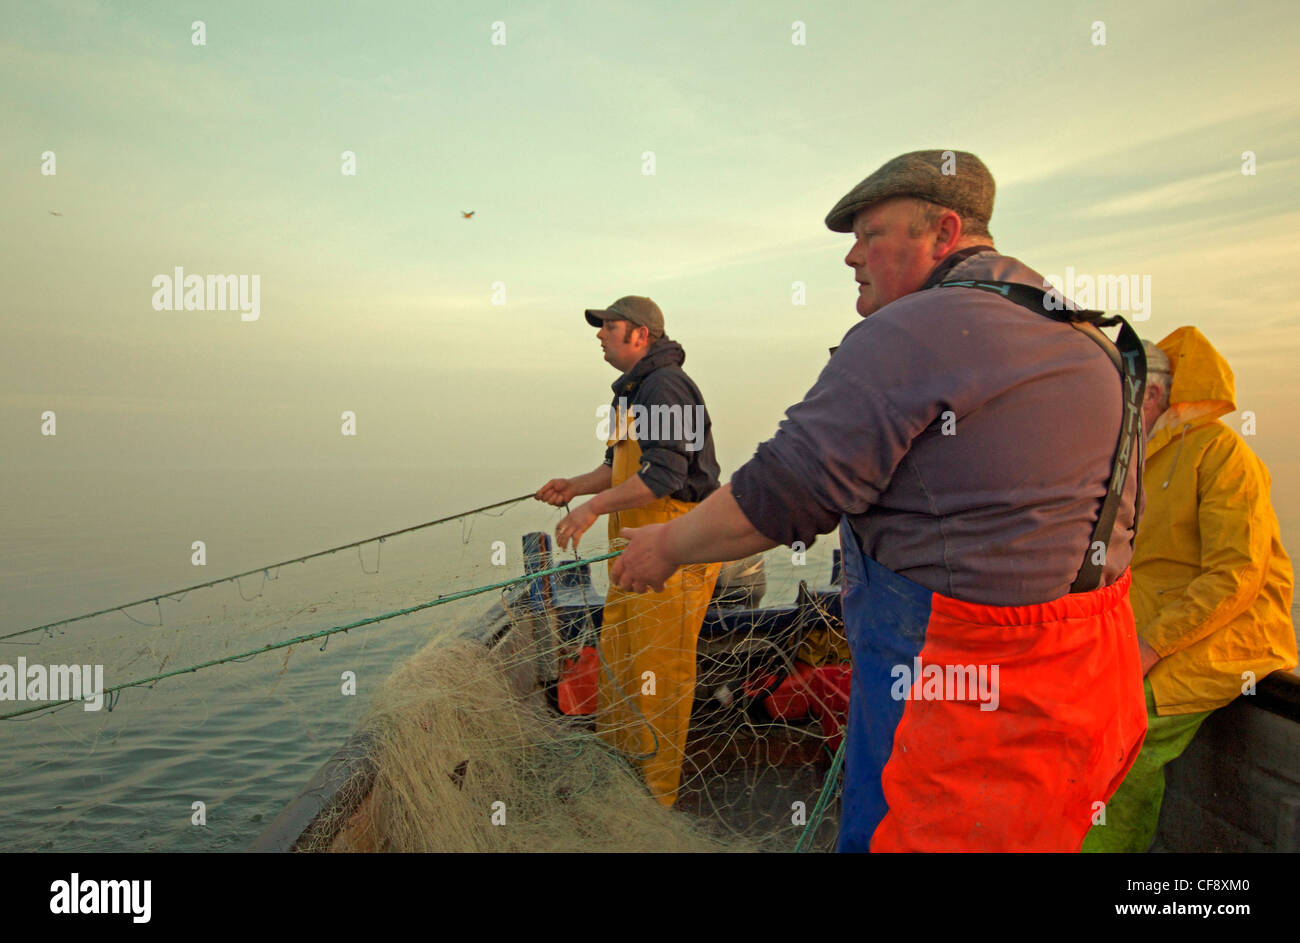 https://c8.alamy.com/comp/CF8XM0/fishermen-take-the-strain-as-they-haul-there-net-to-bring-in-the-morning-CF8XM0.jpg